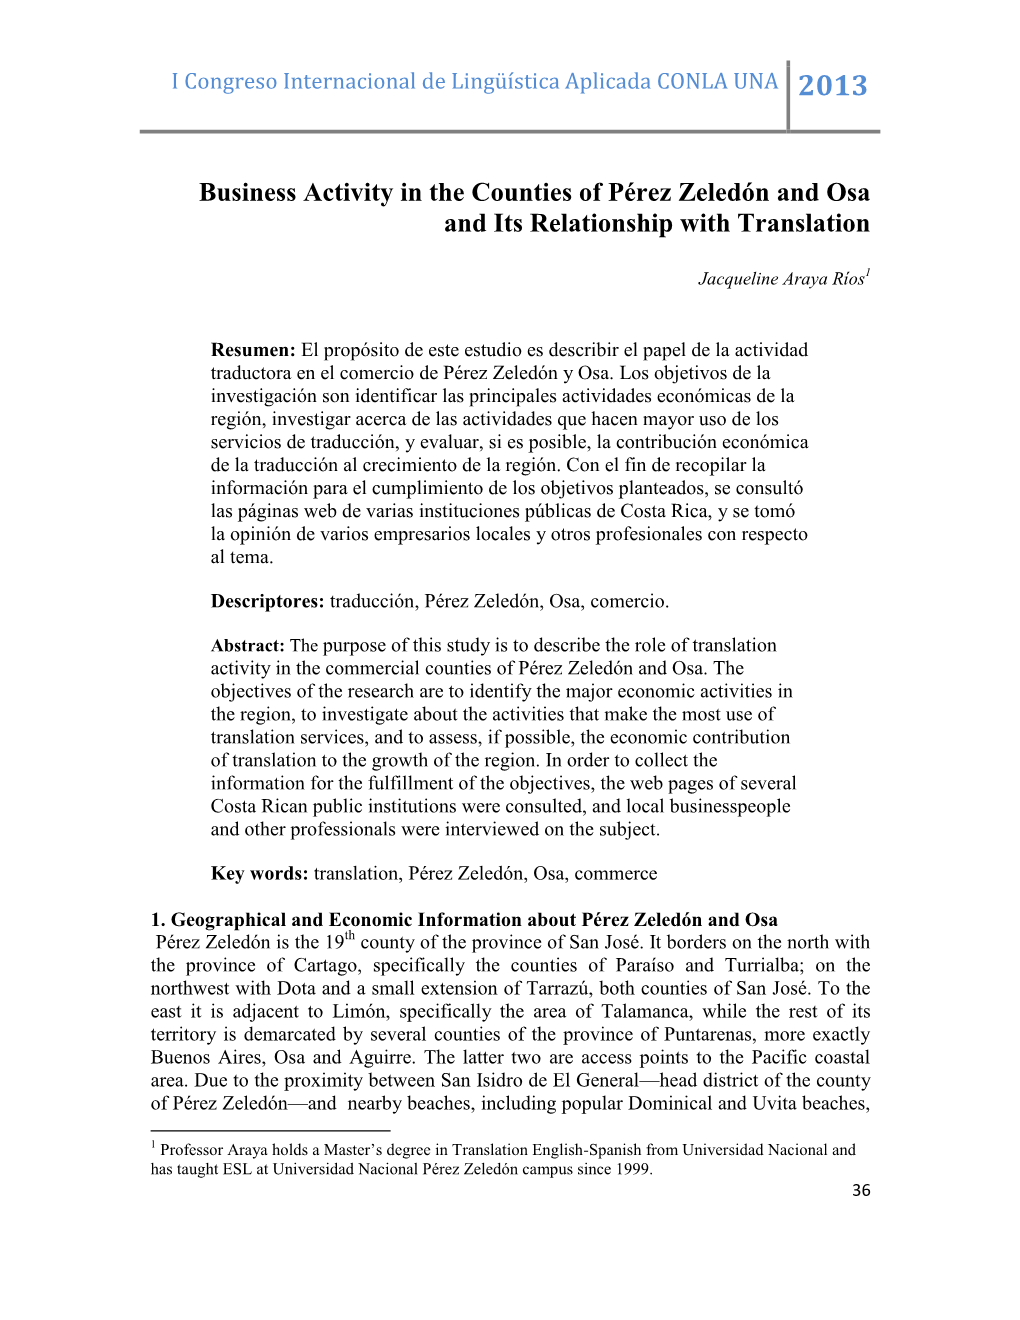 Business Activity in the Counties of Pérez Zeledón and Osa and Its Relationship with Translation